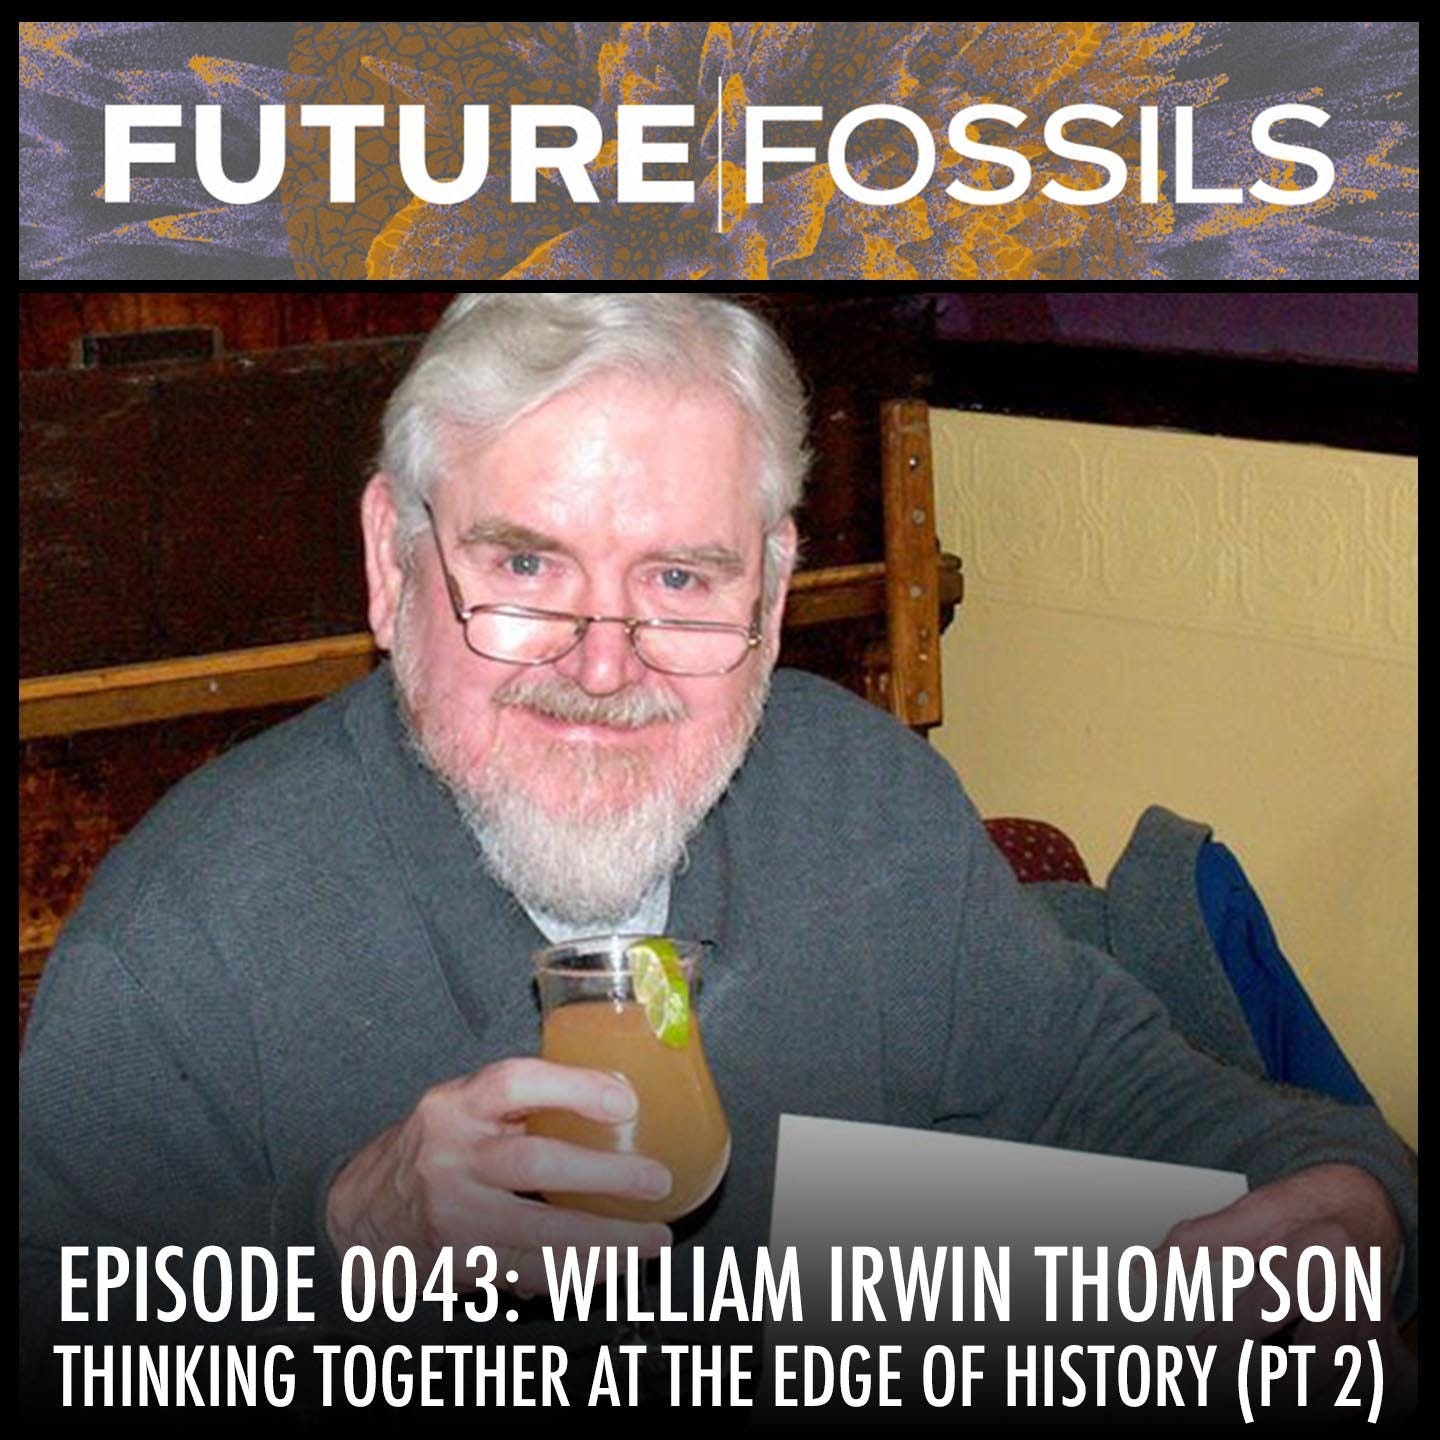 43 - William Irwin Thompson, Part 2 (Thinking Together at the Edge of History)